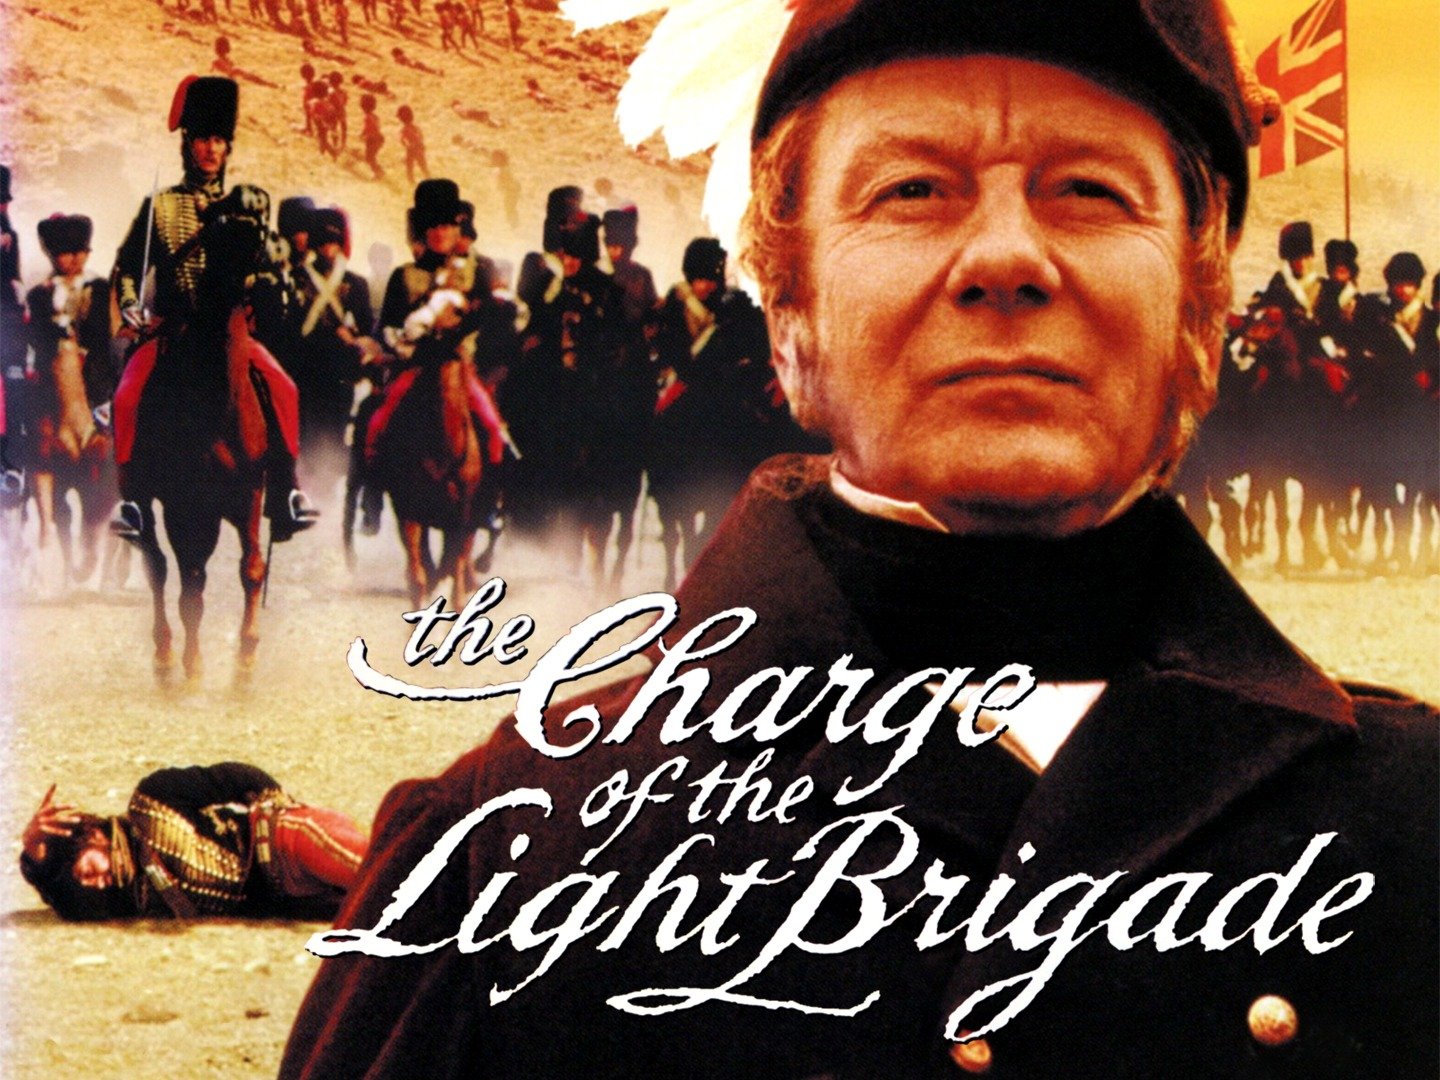 charge of light brigade